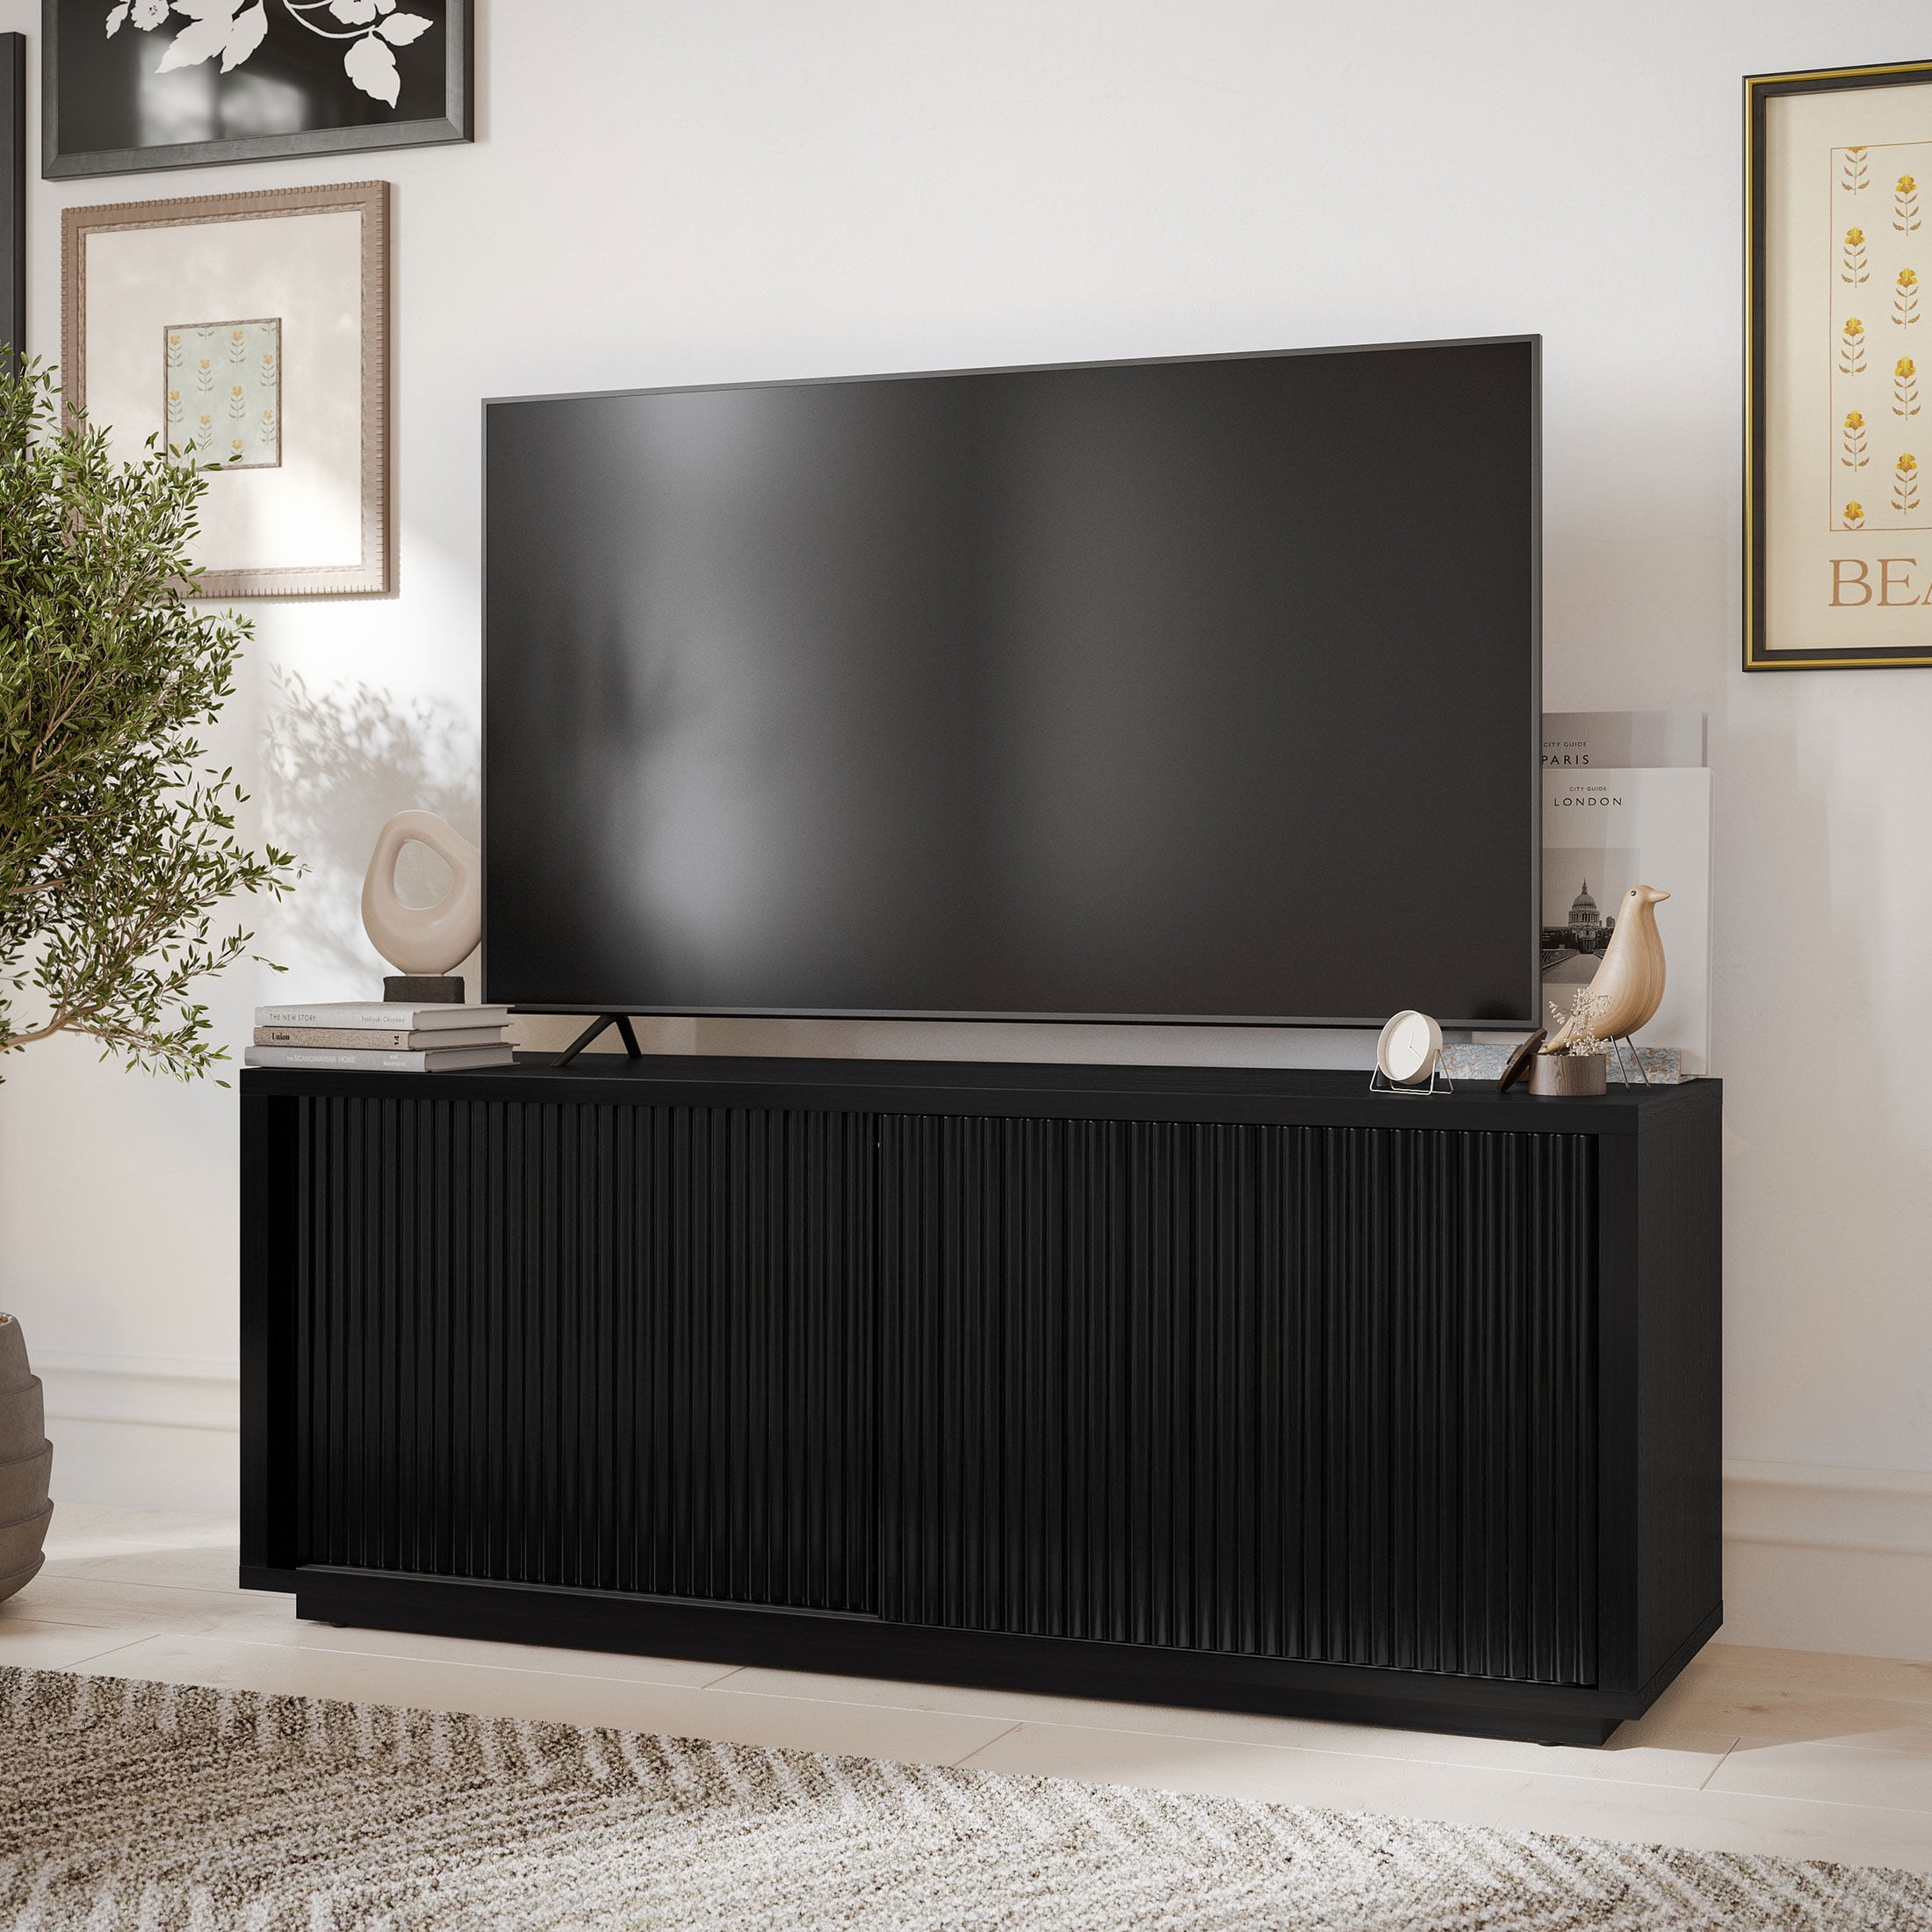 Beautiful Fluted TV Stand for TV’s up to 70” by Drew Barrymore, Rich Black Finish - Walmart.com